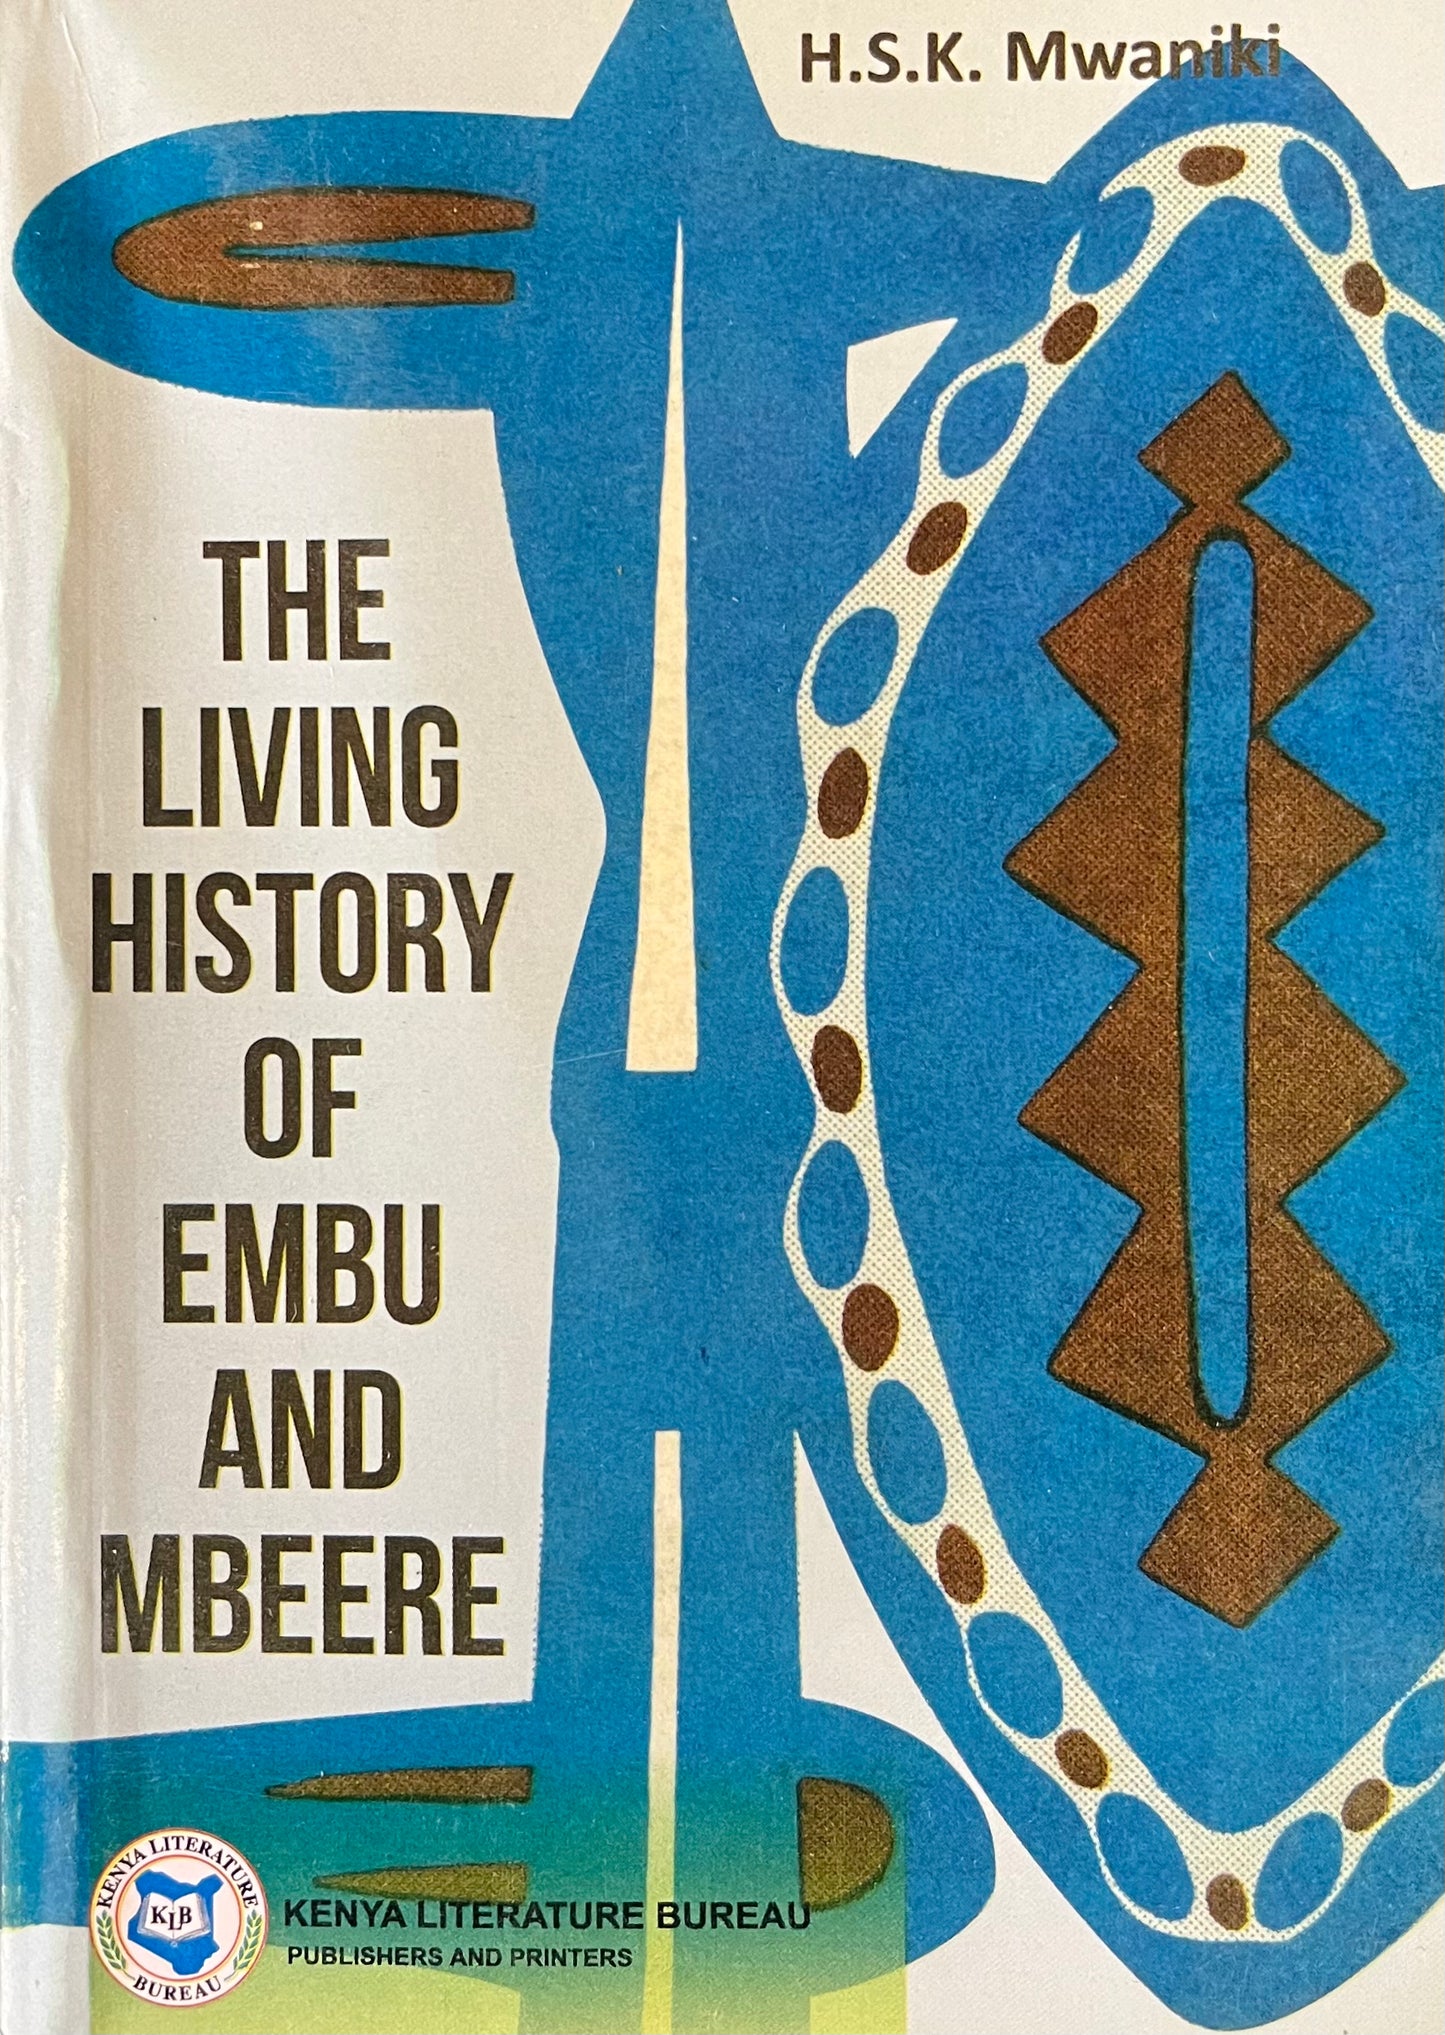 THE LIVING HISTORY OF EMBU AND MBEERE By H. S. K Mwaniki